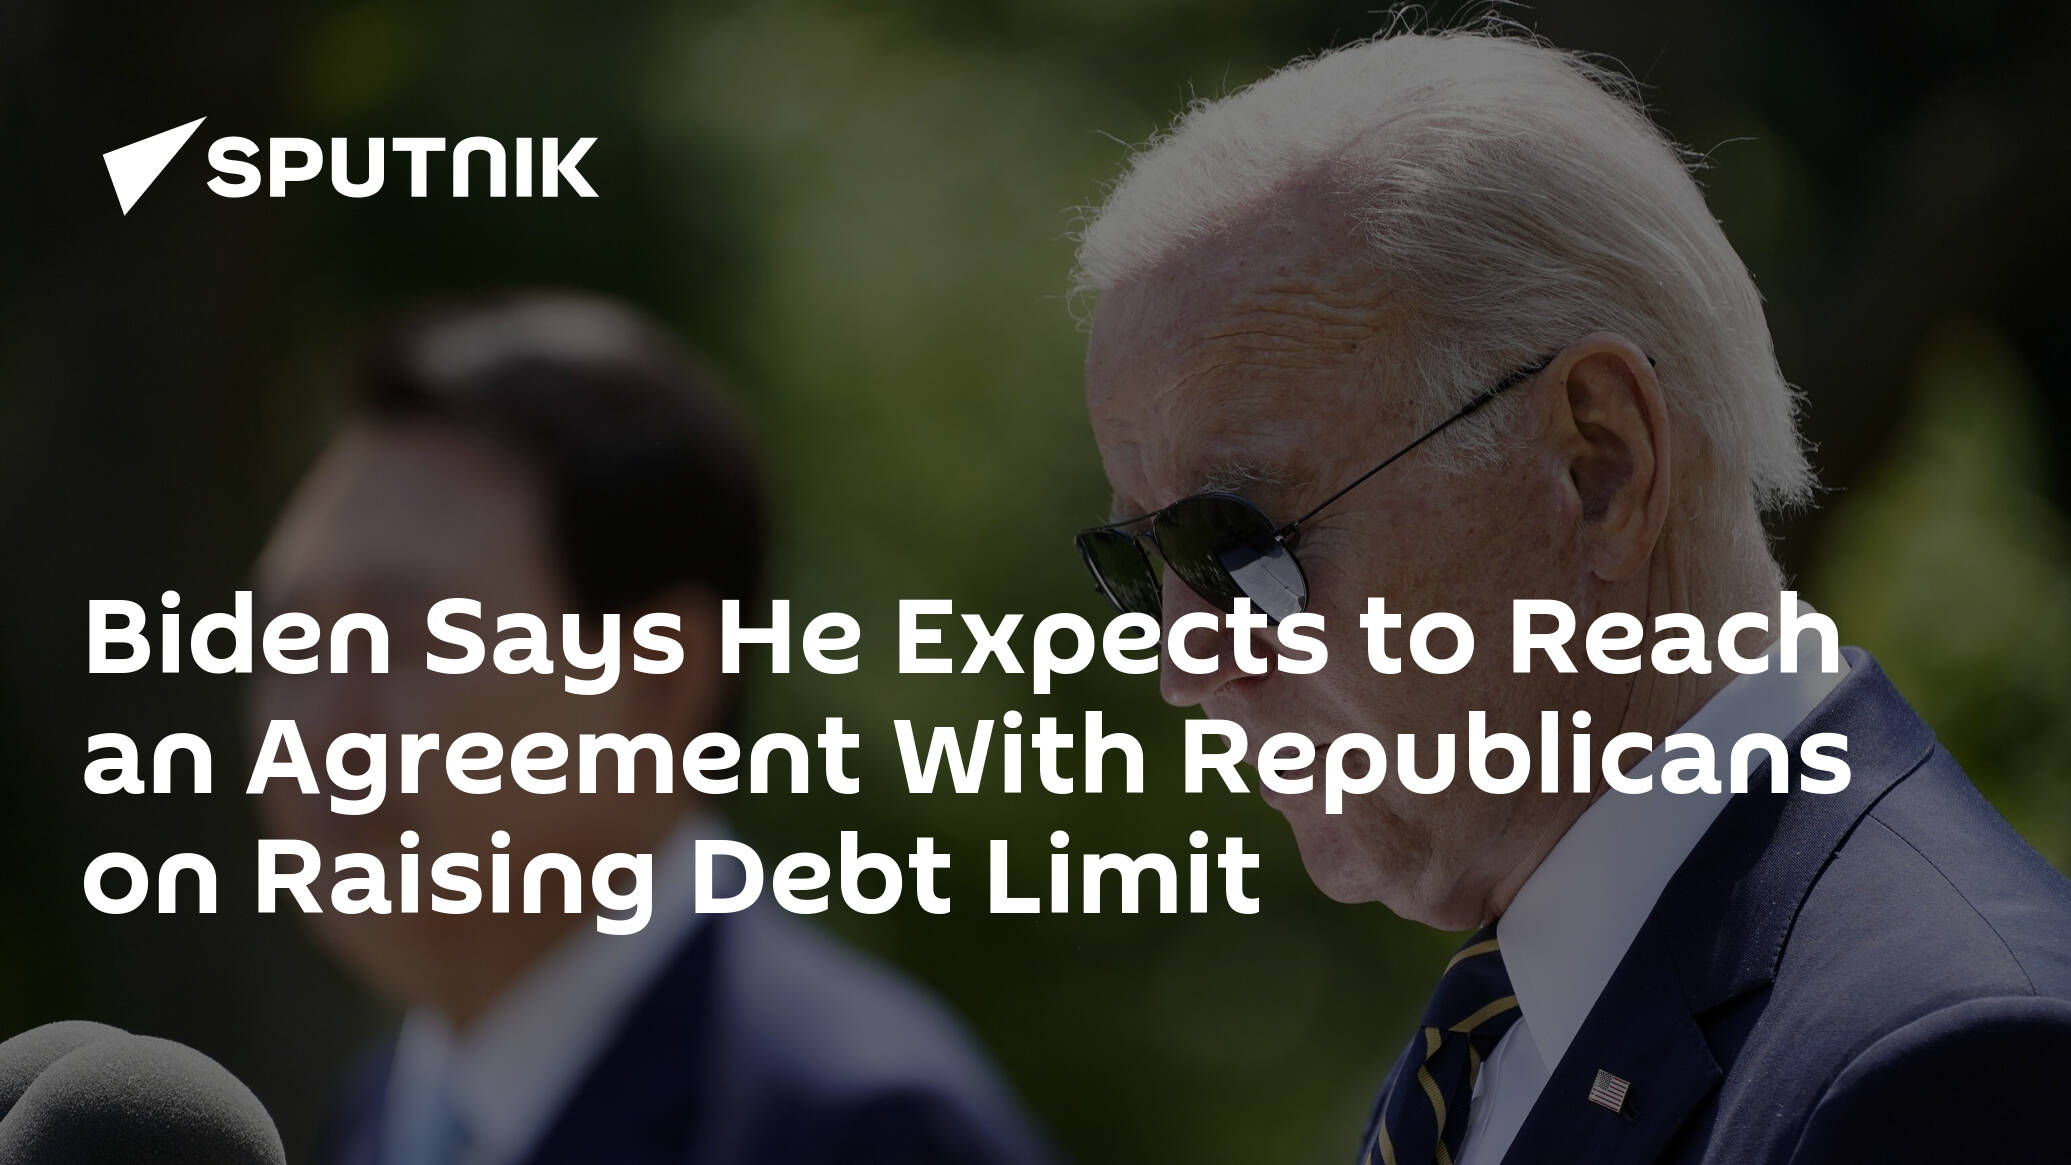 Biden Says He Expects to Reach an Agreement With Republicans on Raising Debt Limit